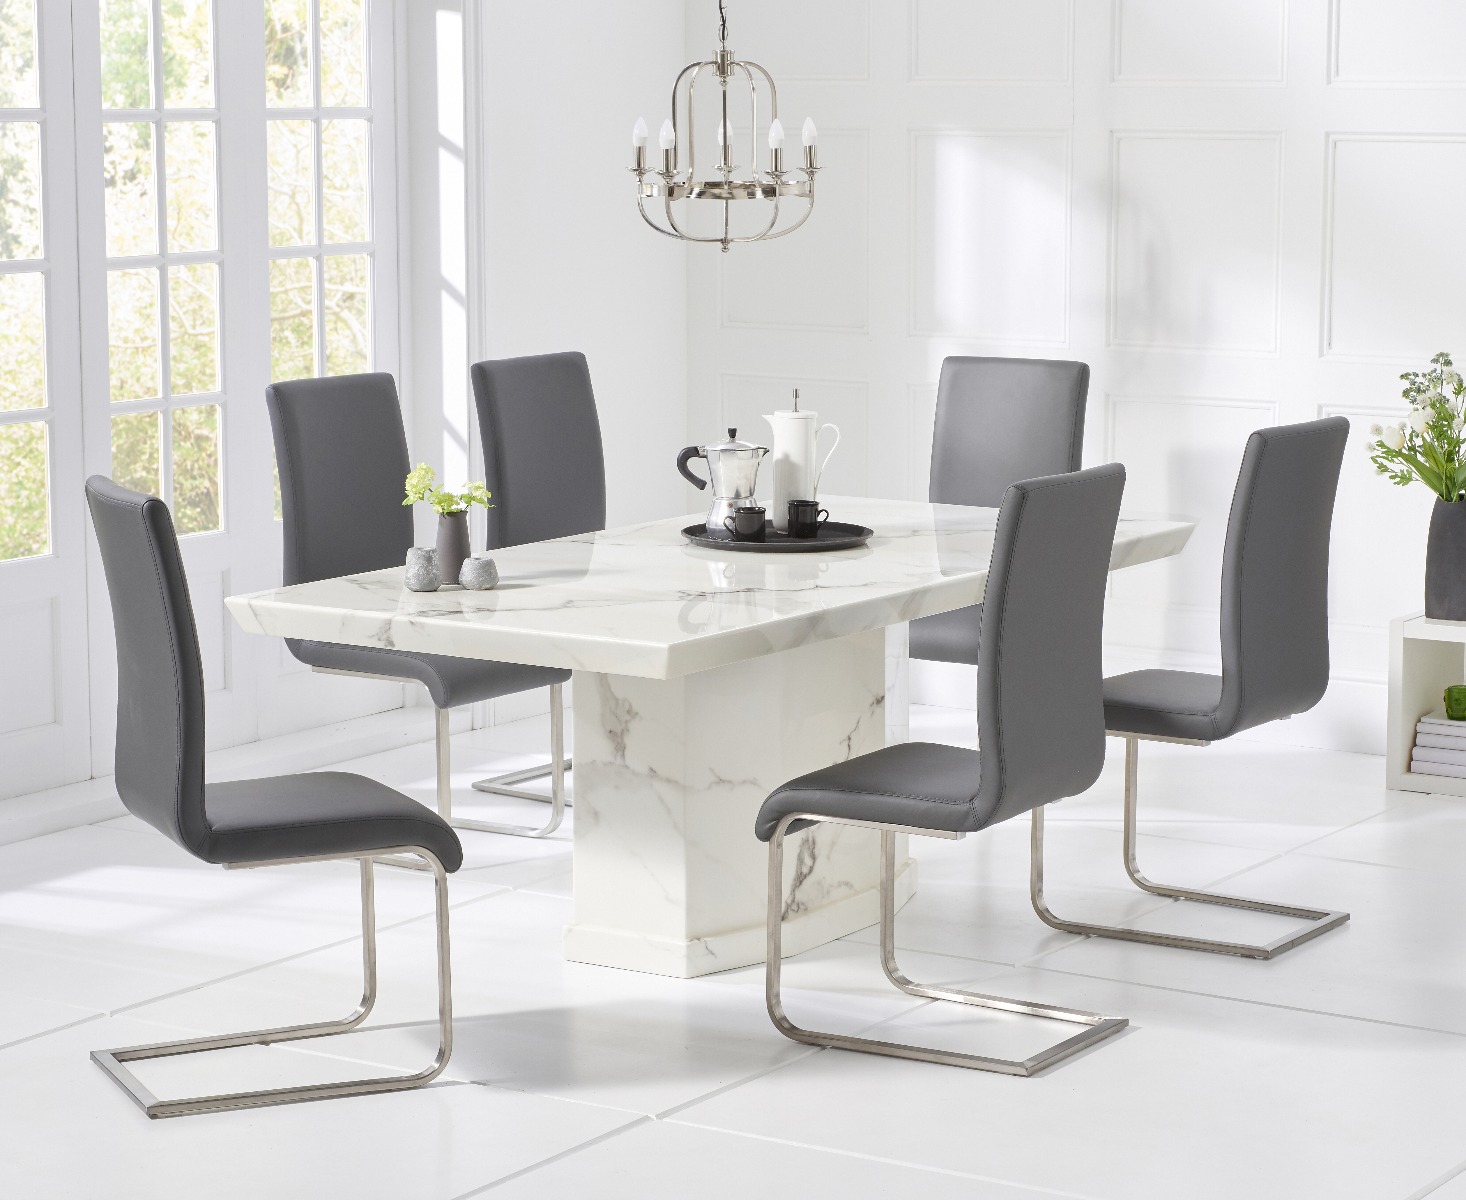 Carvelle 200cm White Pedestal Marble Dining Table With 6 White Malaga Chairs